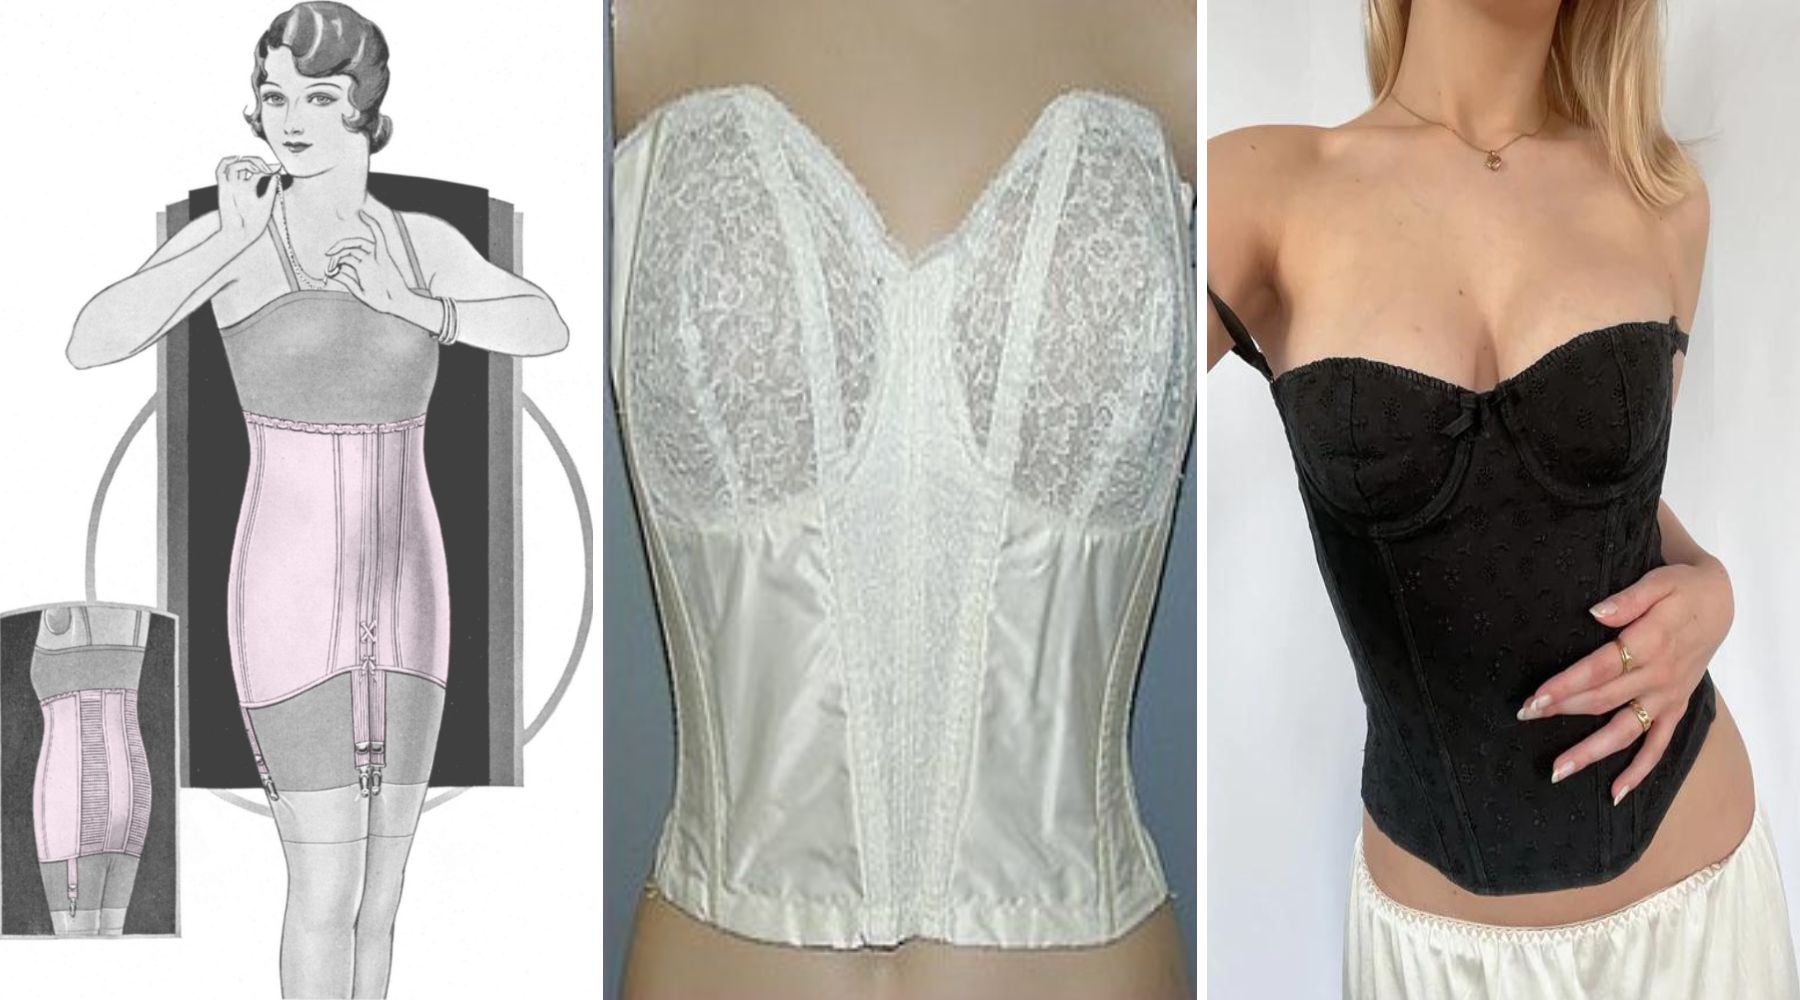 do you prefer with or without belt? : r/corsets